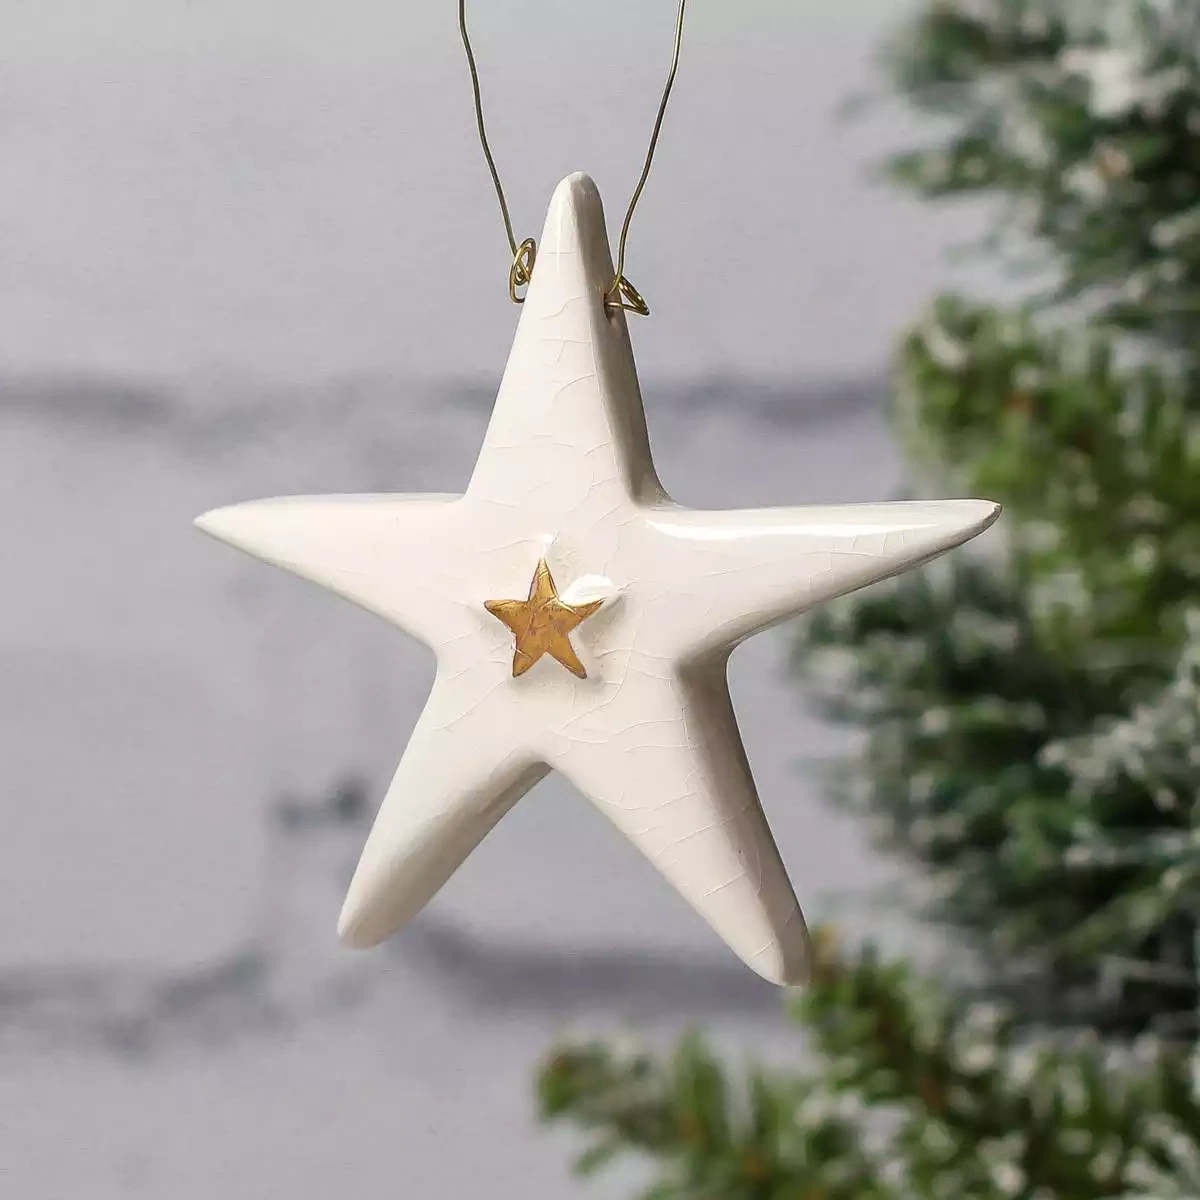 Star and Gold Star Ceramic Christmas Decoration - Small by Sophie Smith